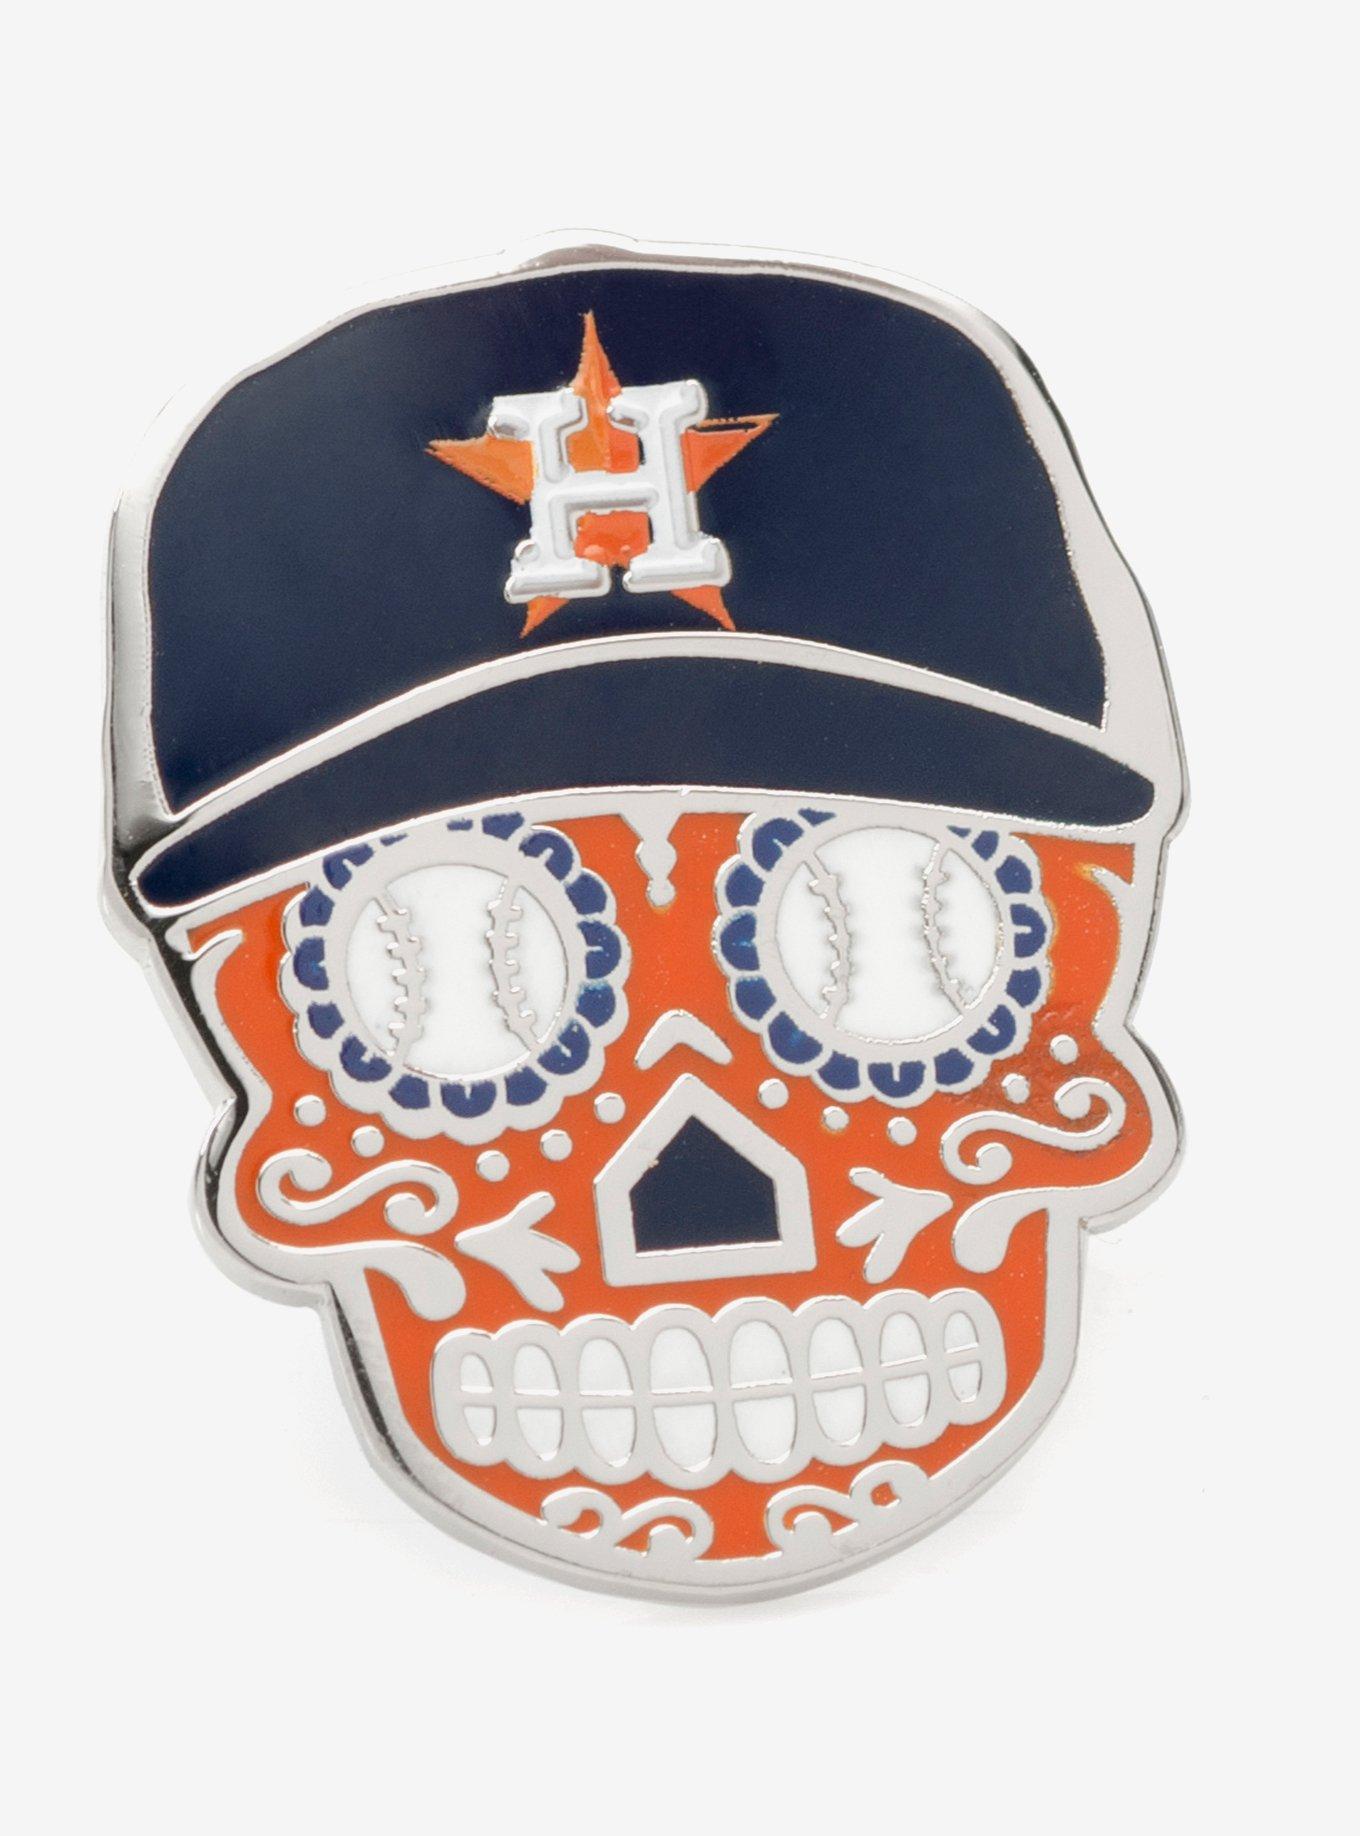 I bought this pack of Astros stickers a few years ago at a garage